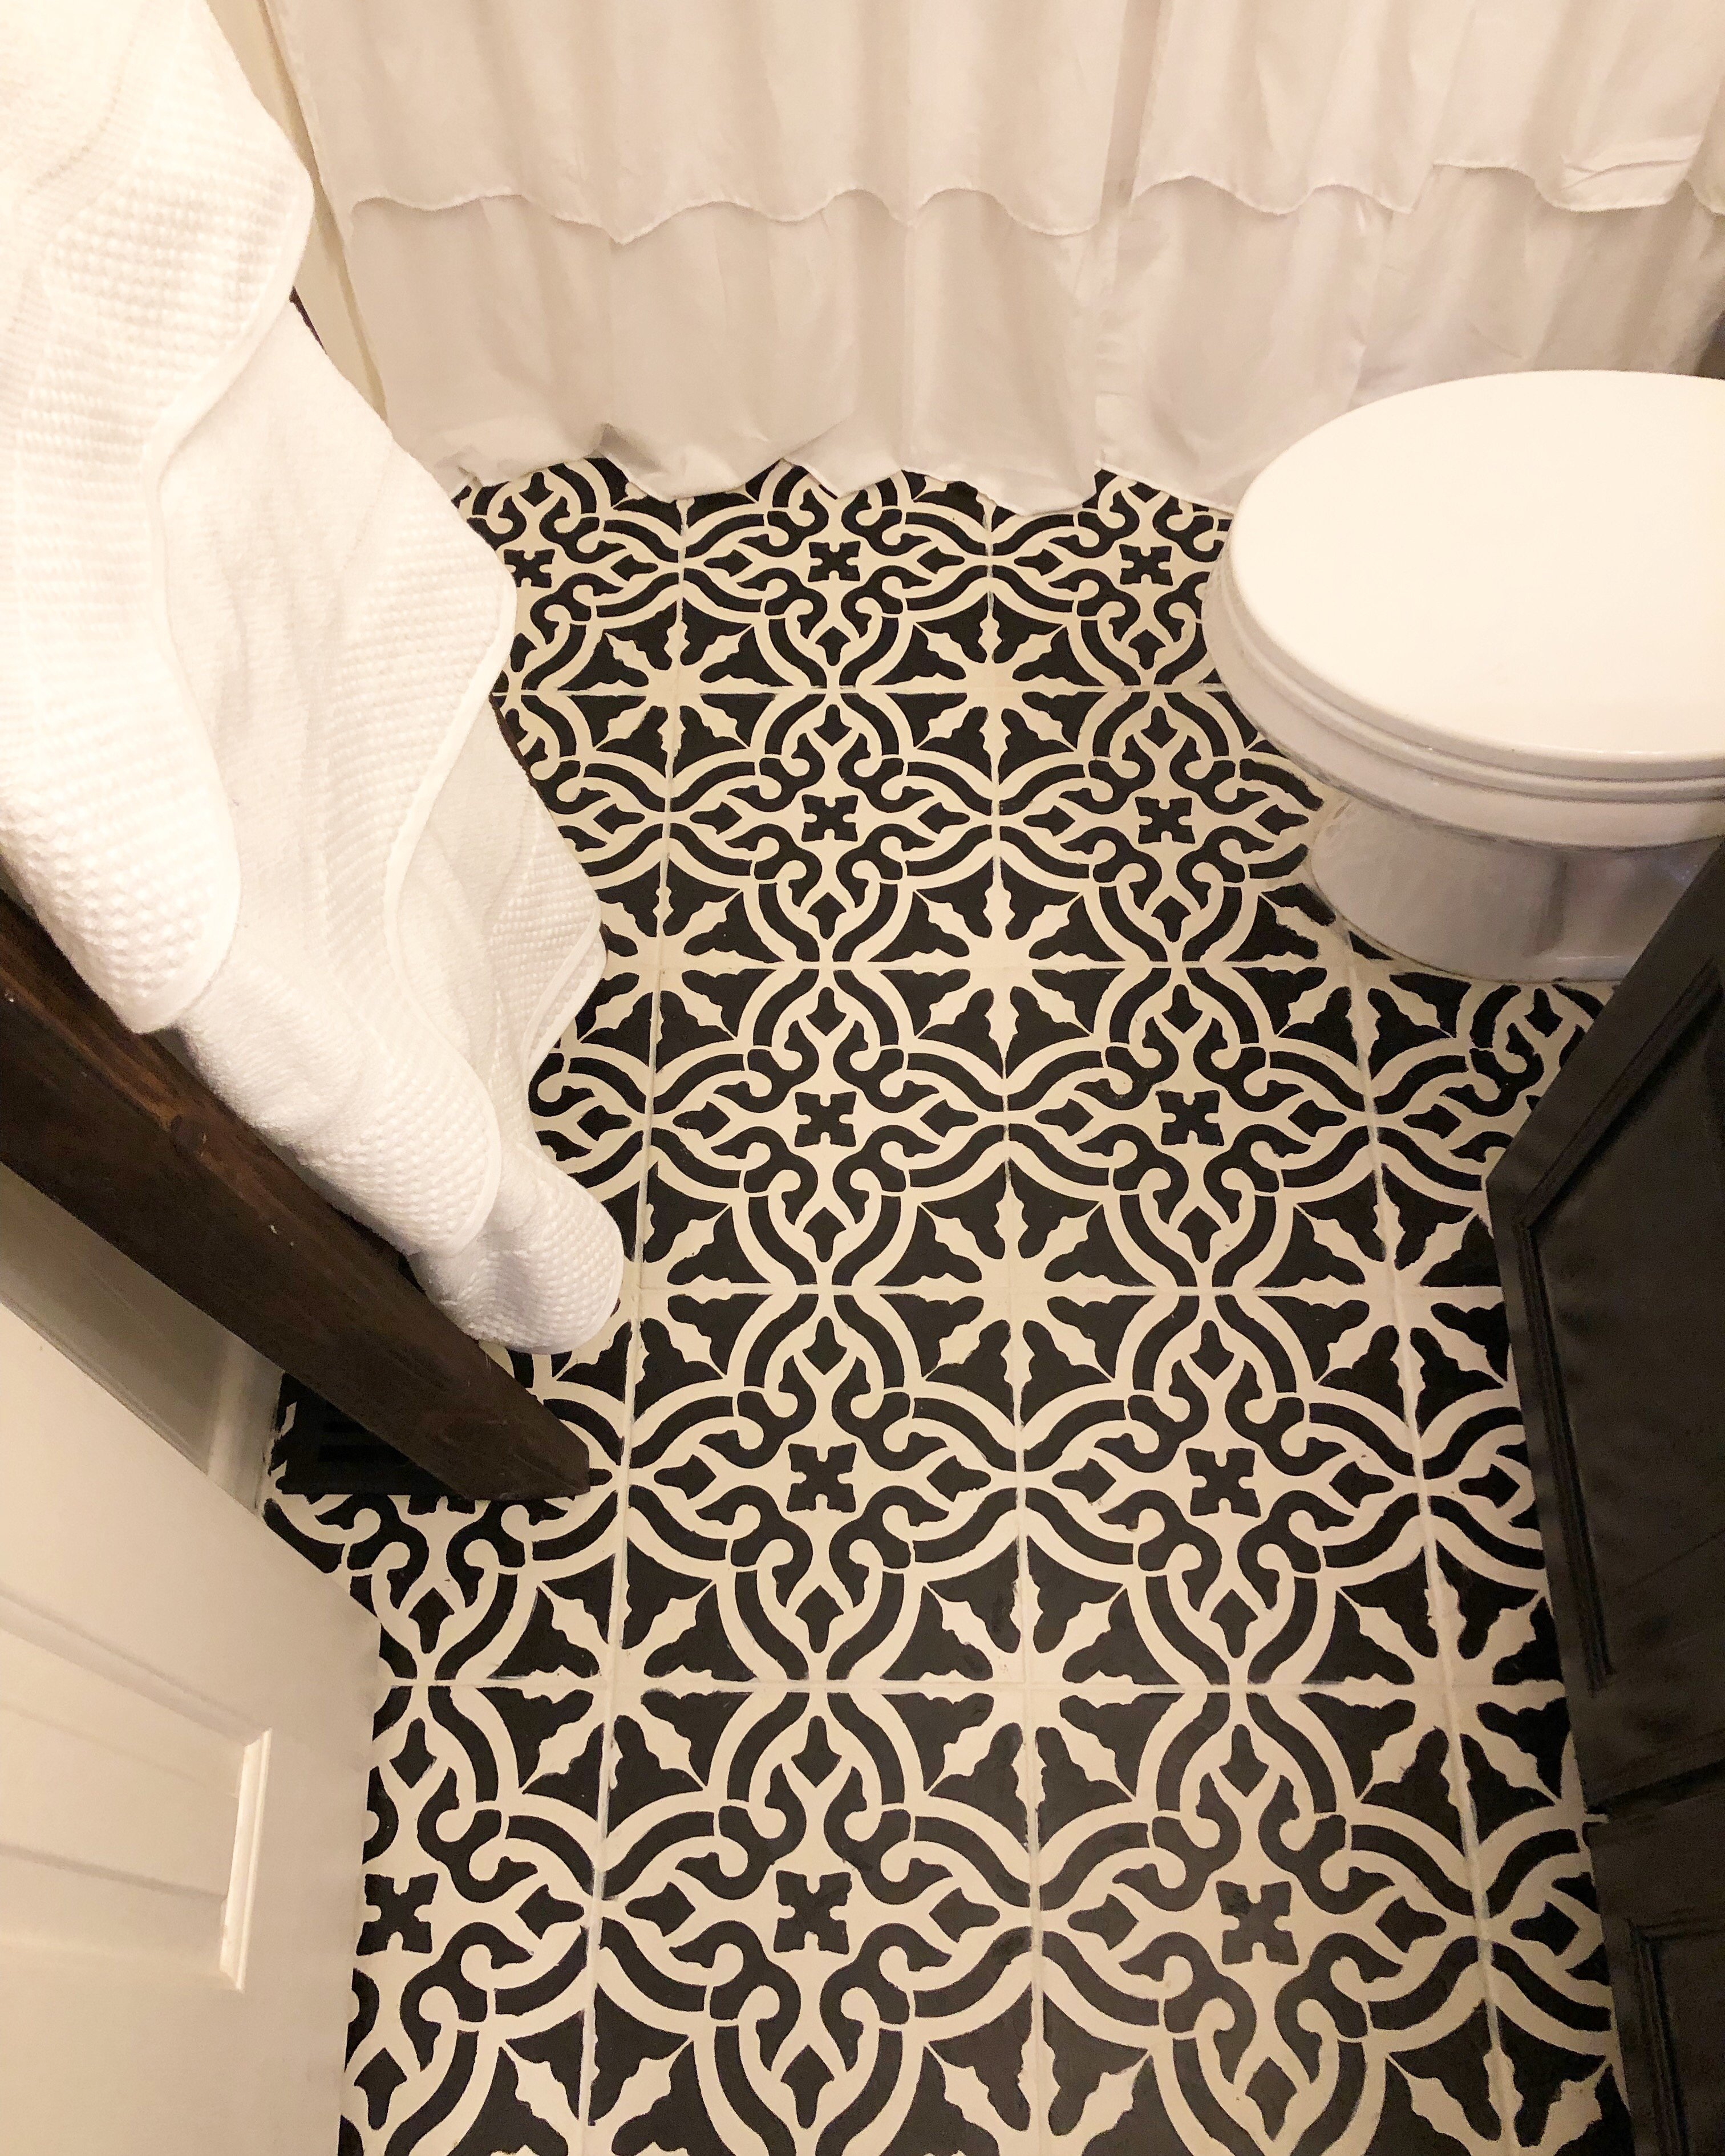 Stenciled ceramic tile floors for the win! Week 4 of the $100 room challenge was a big one!